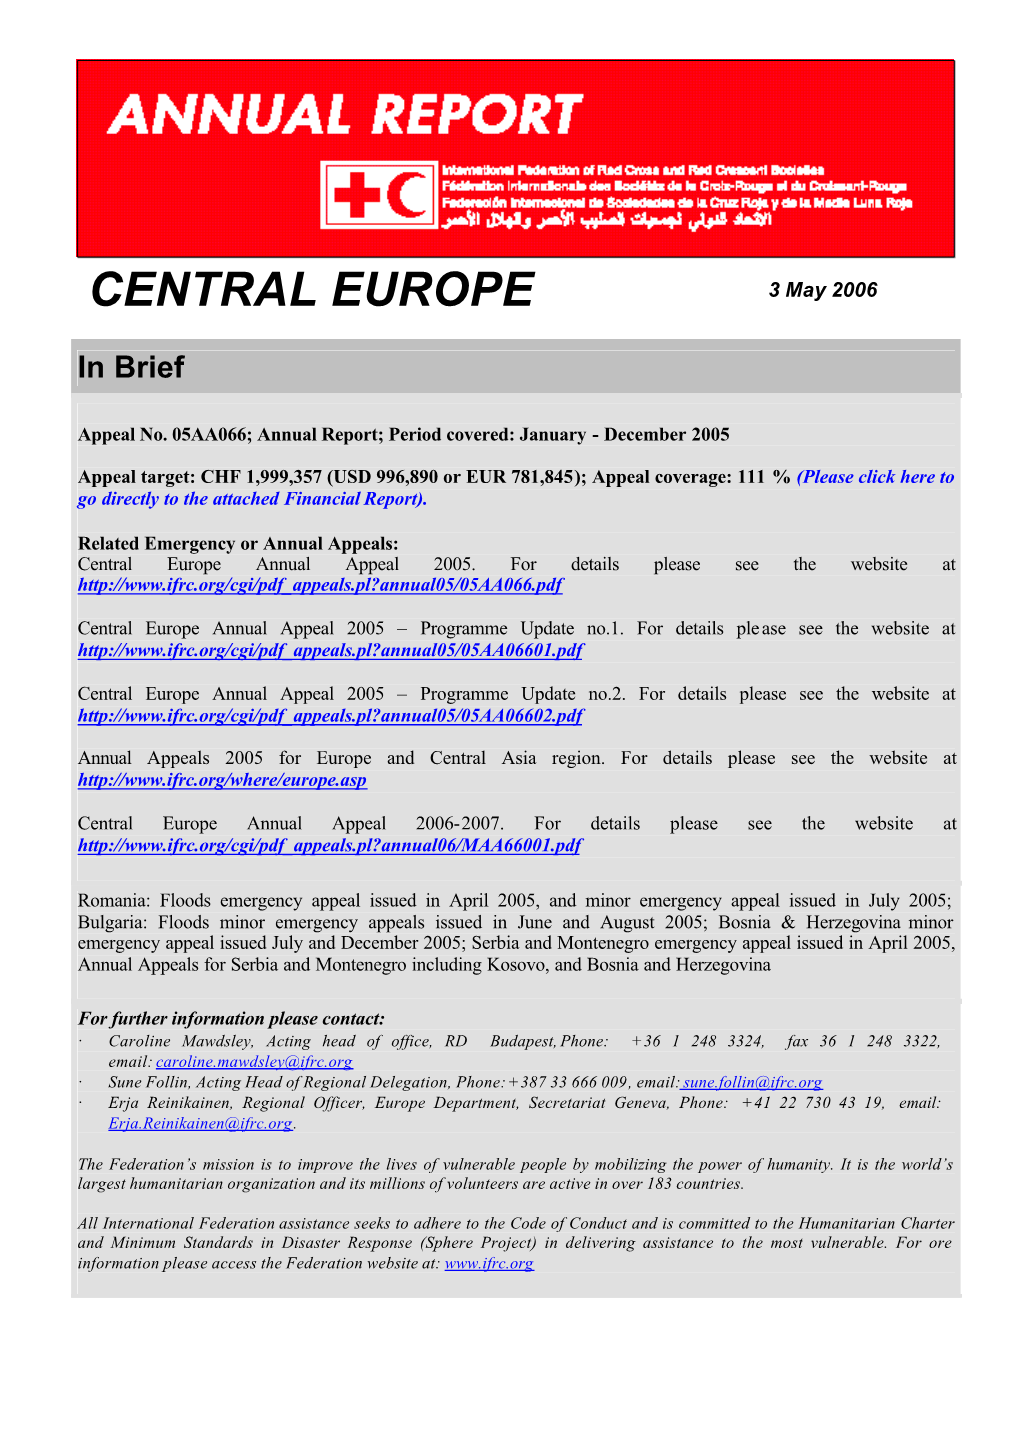 IFRC-Central Europe Annual Appeal 2005 (Appeal No.05AA066